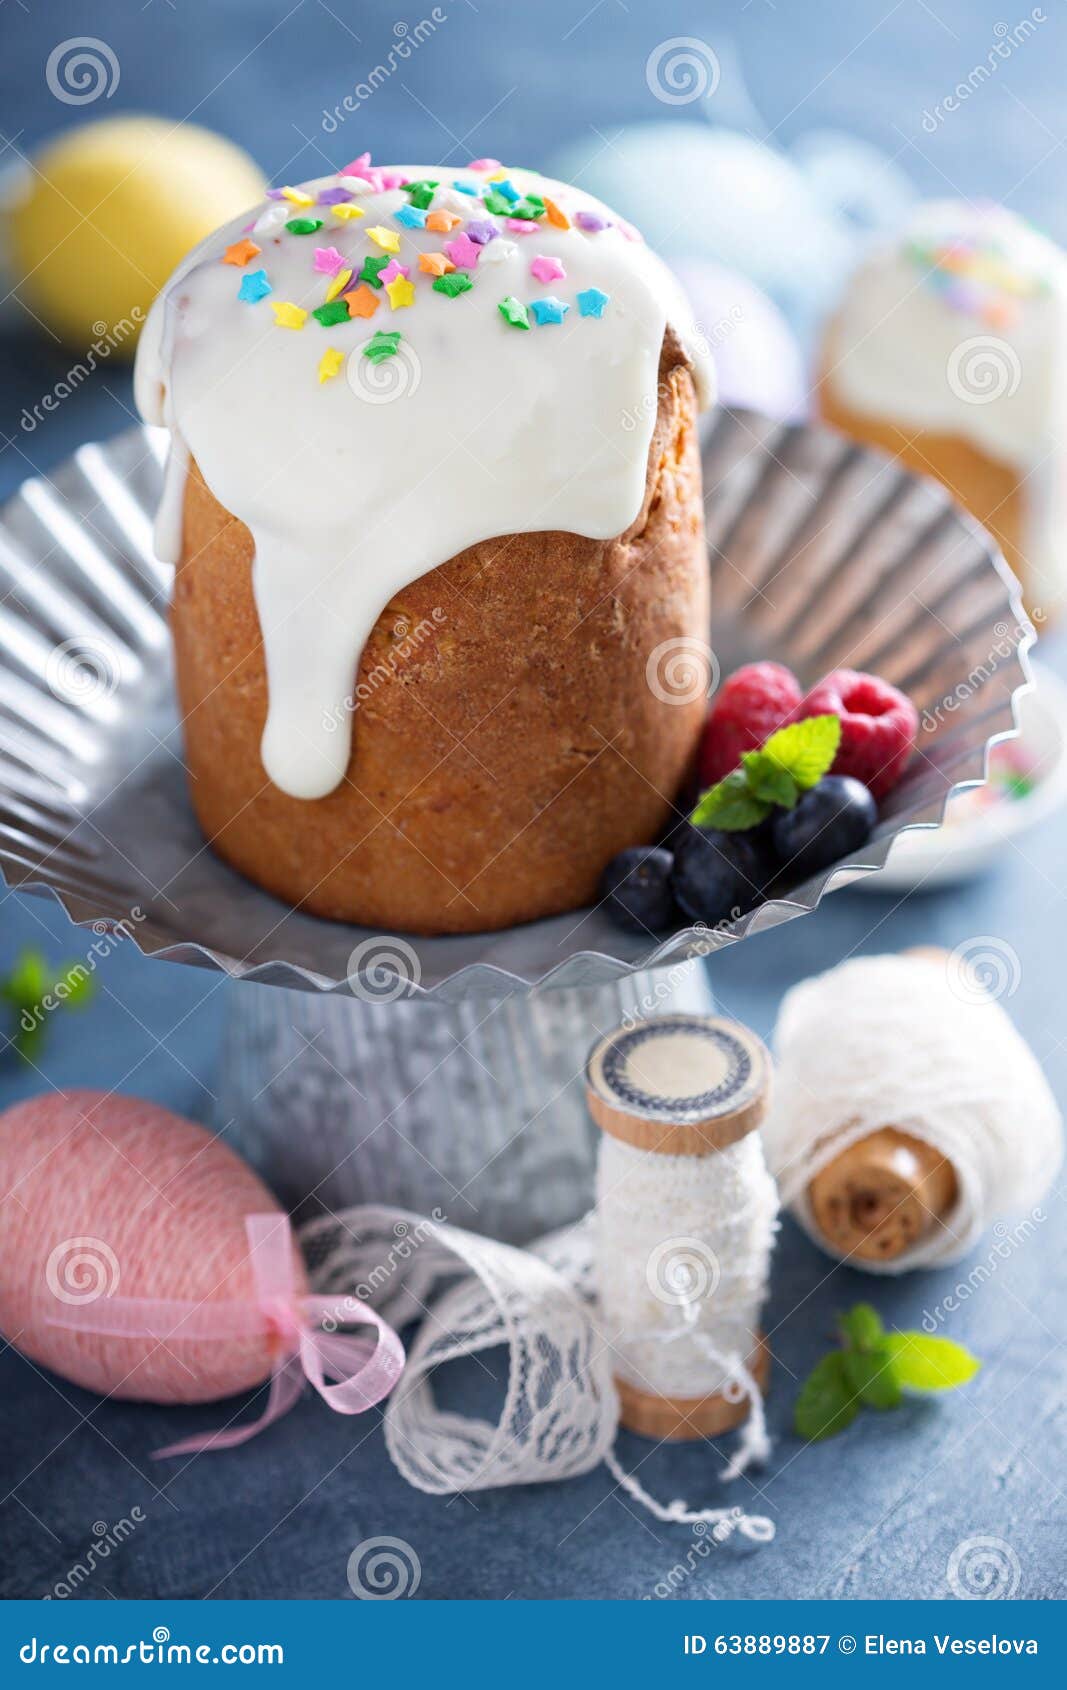 Traditional Easter Yeasted Cake with White Glaze Stock Image - Image of ...